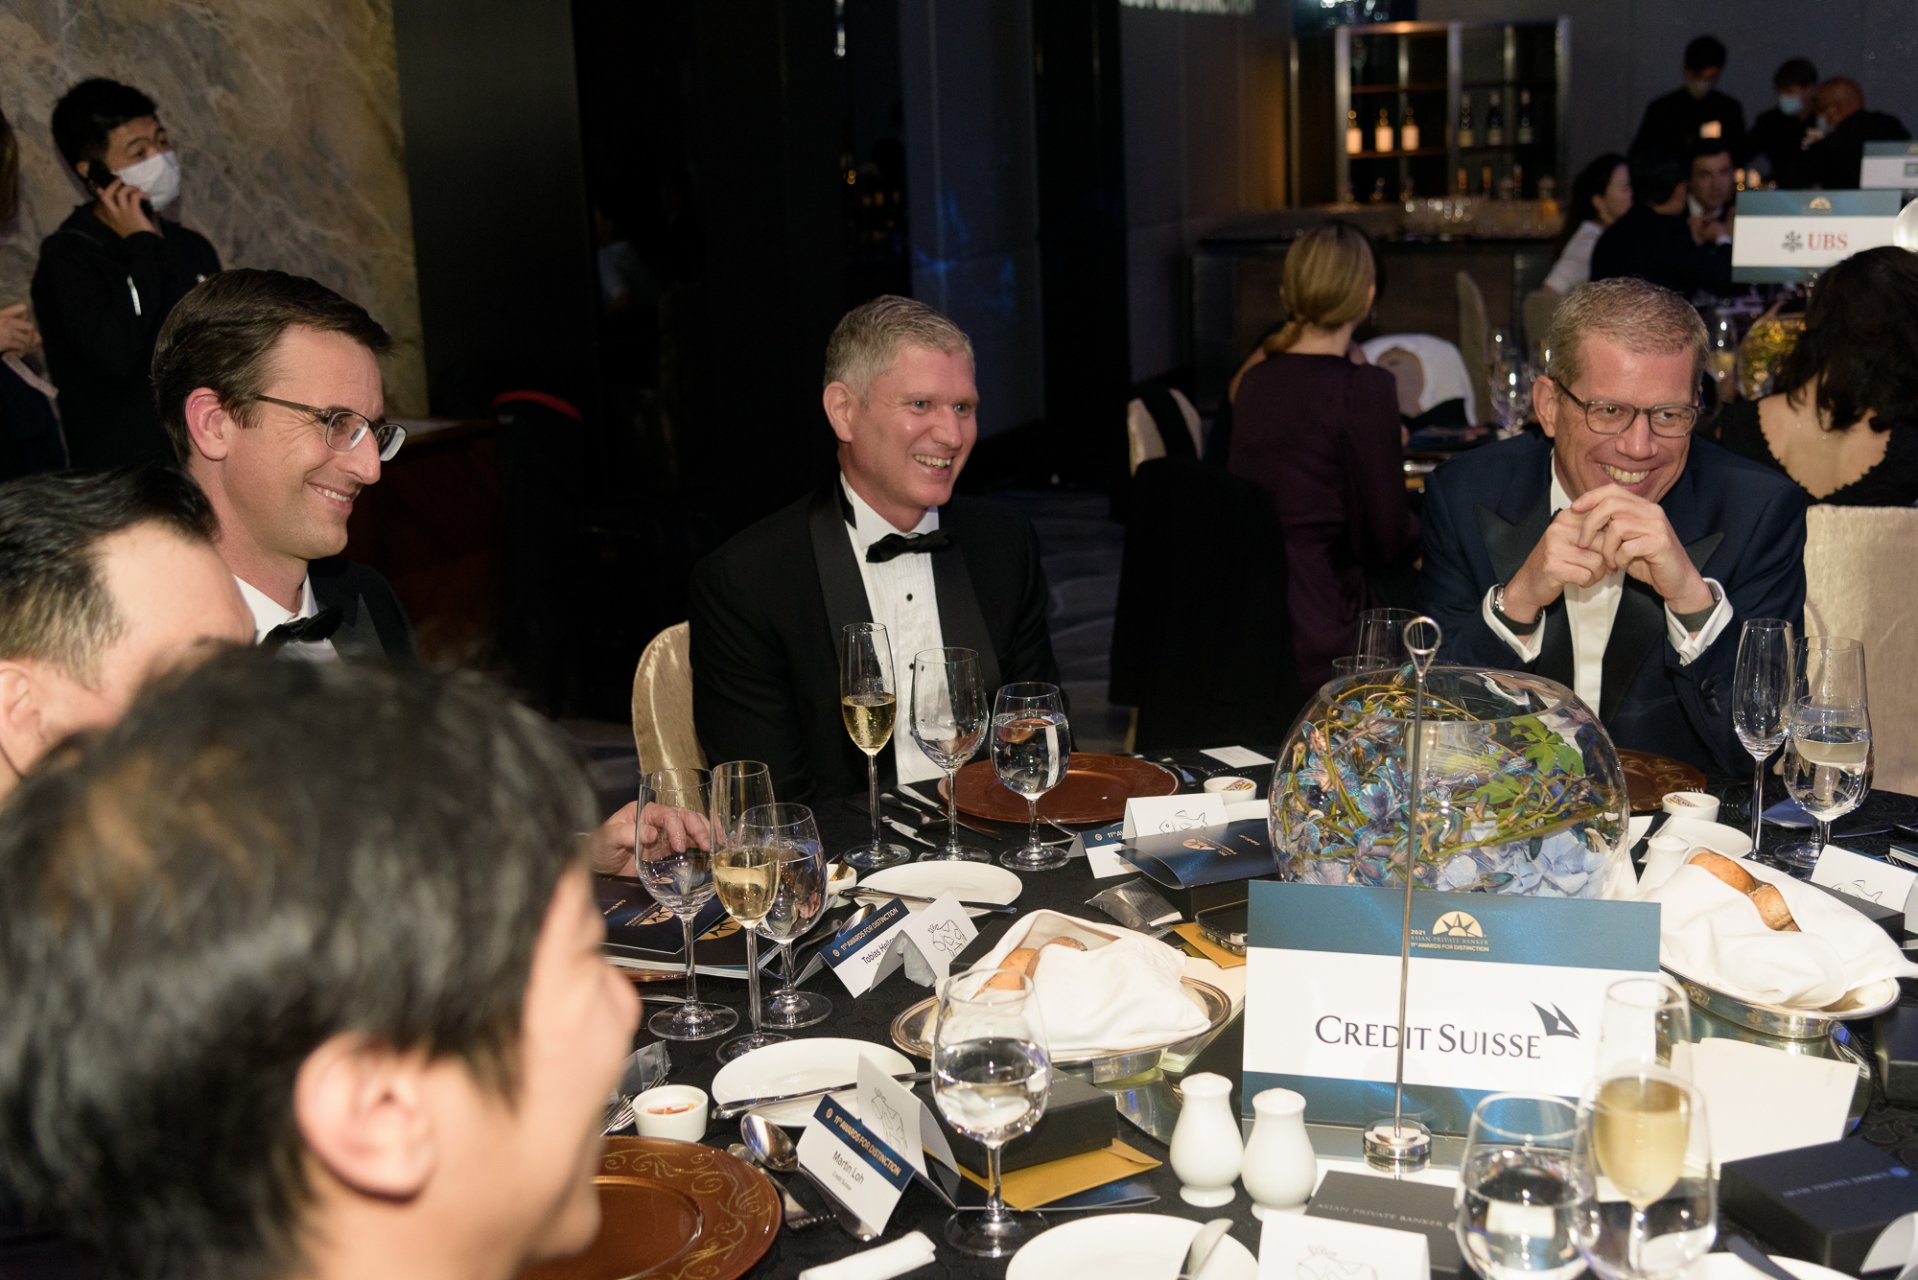 Credit Suisse at the Awards for Distinction Gala Dinner